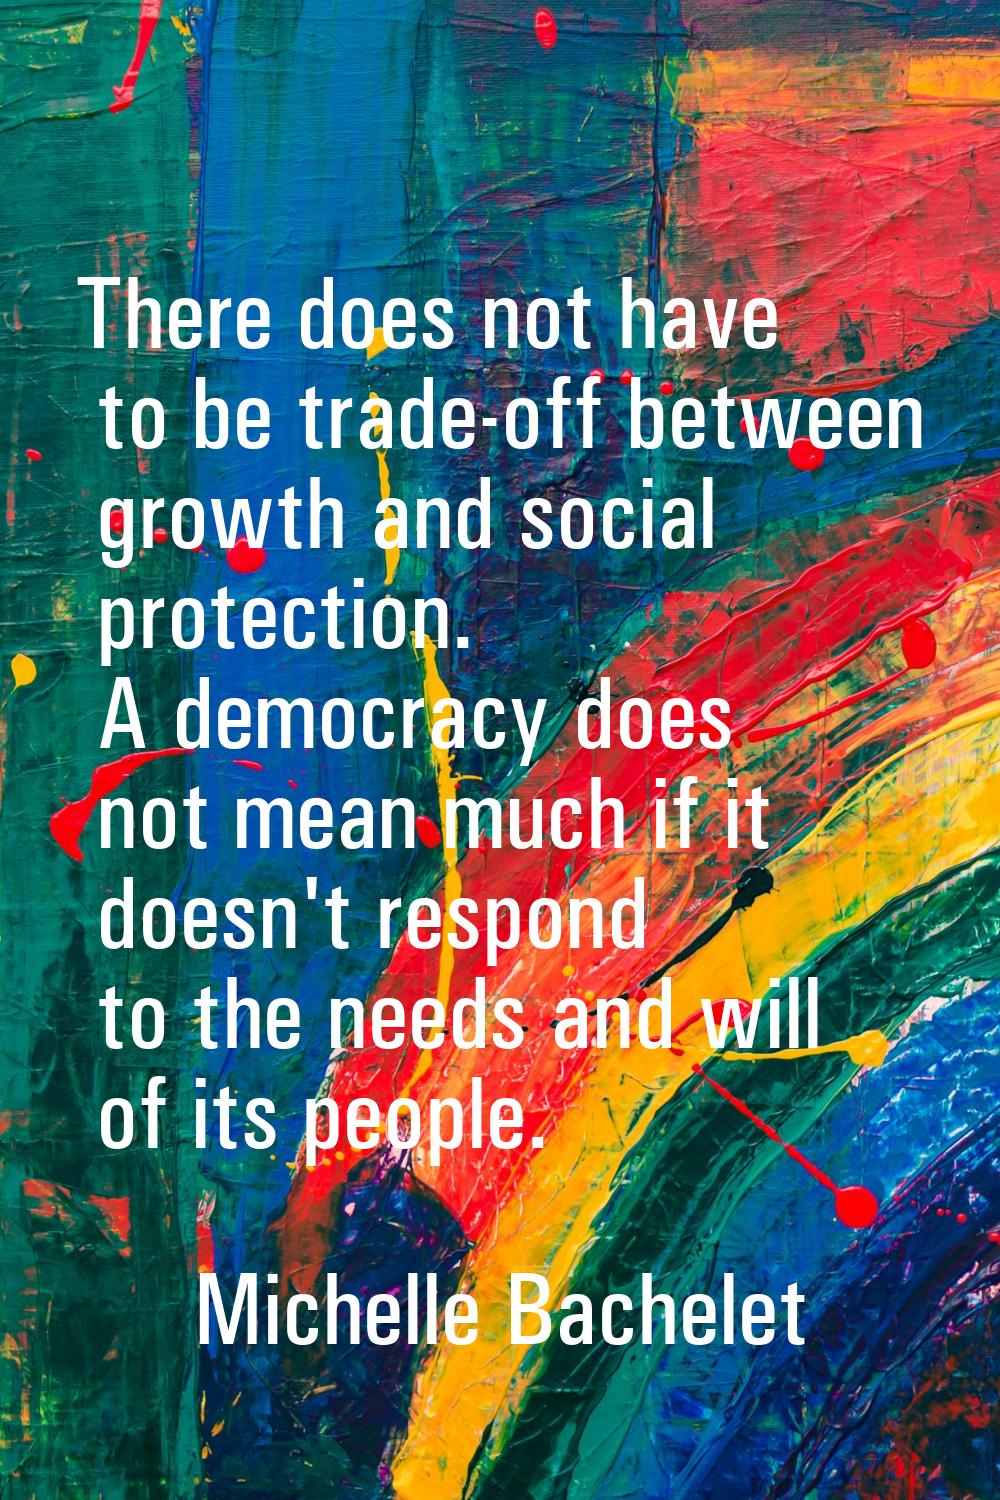 There does not have to be trade-off between growth and social protection. A democracy does not mean